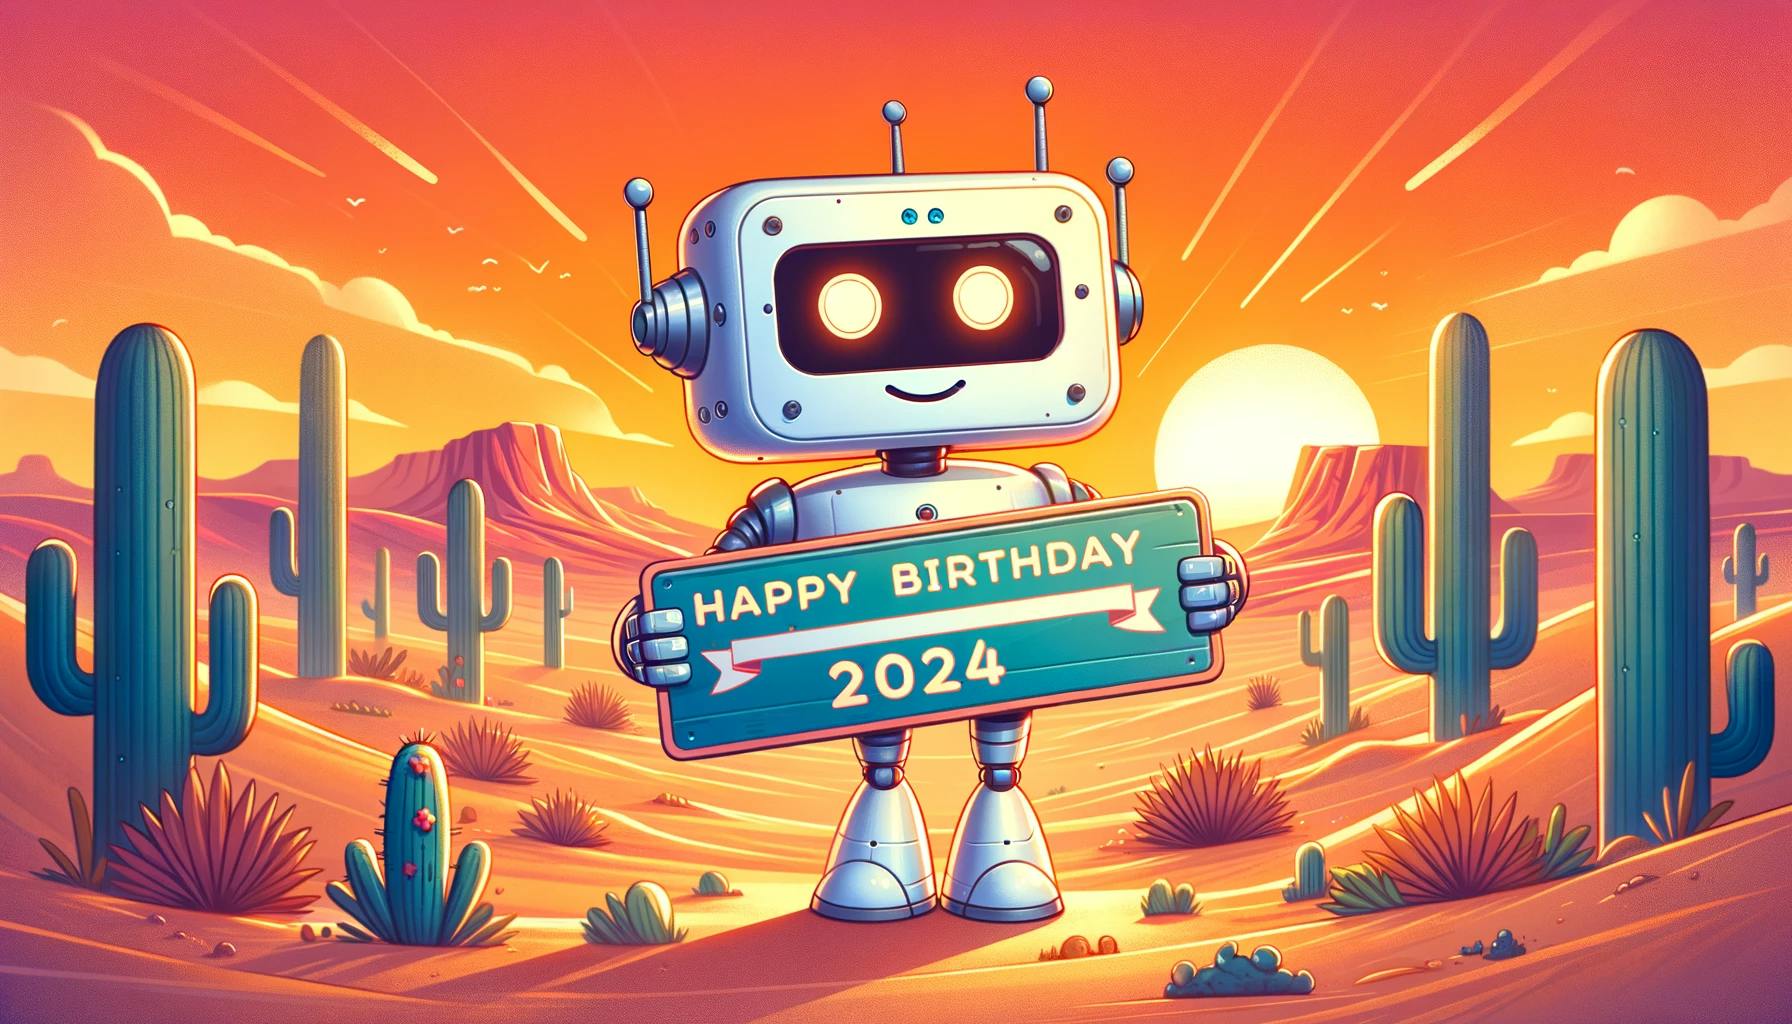 25 Unique Happy Birthday Wishes Ideas and Images for 2024